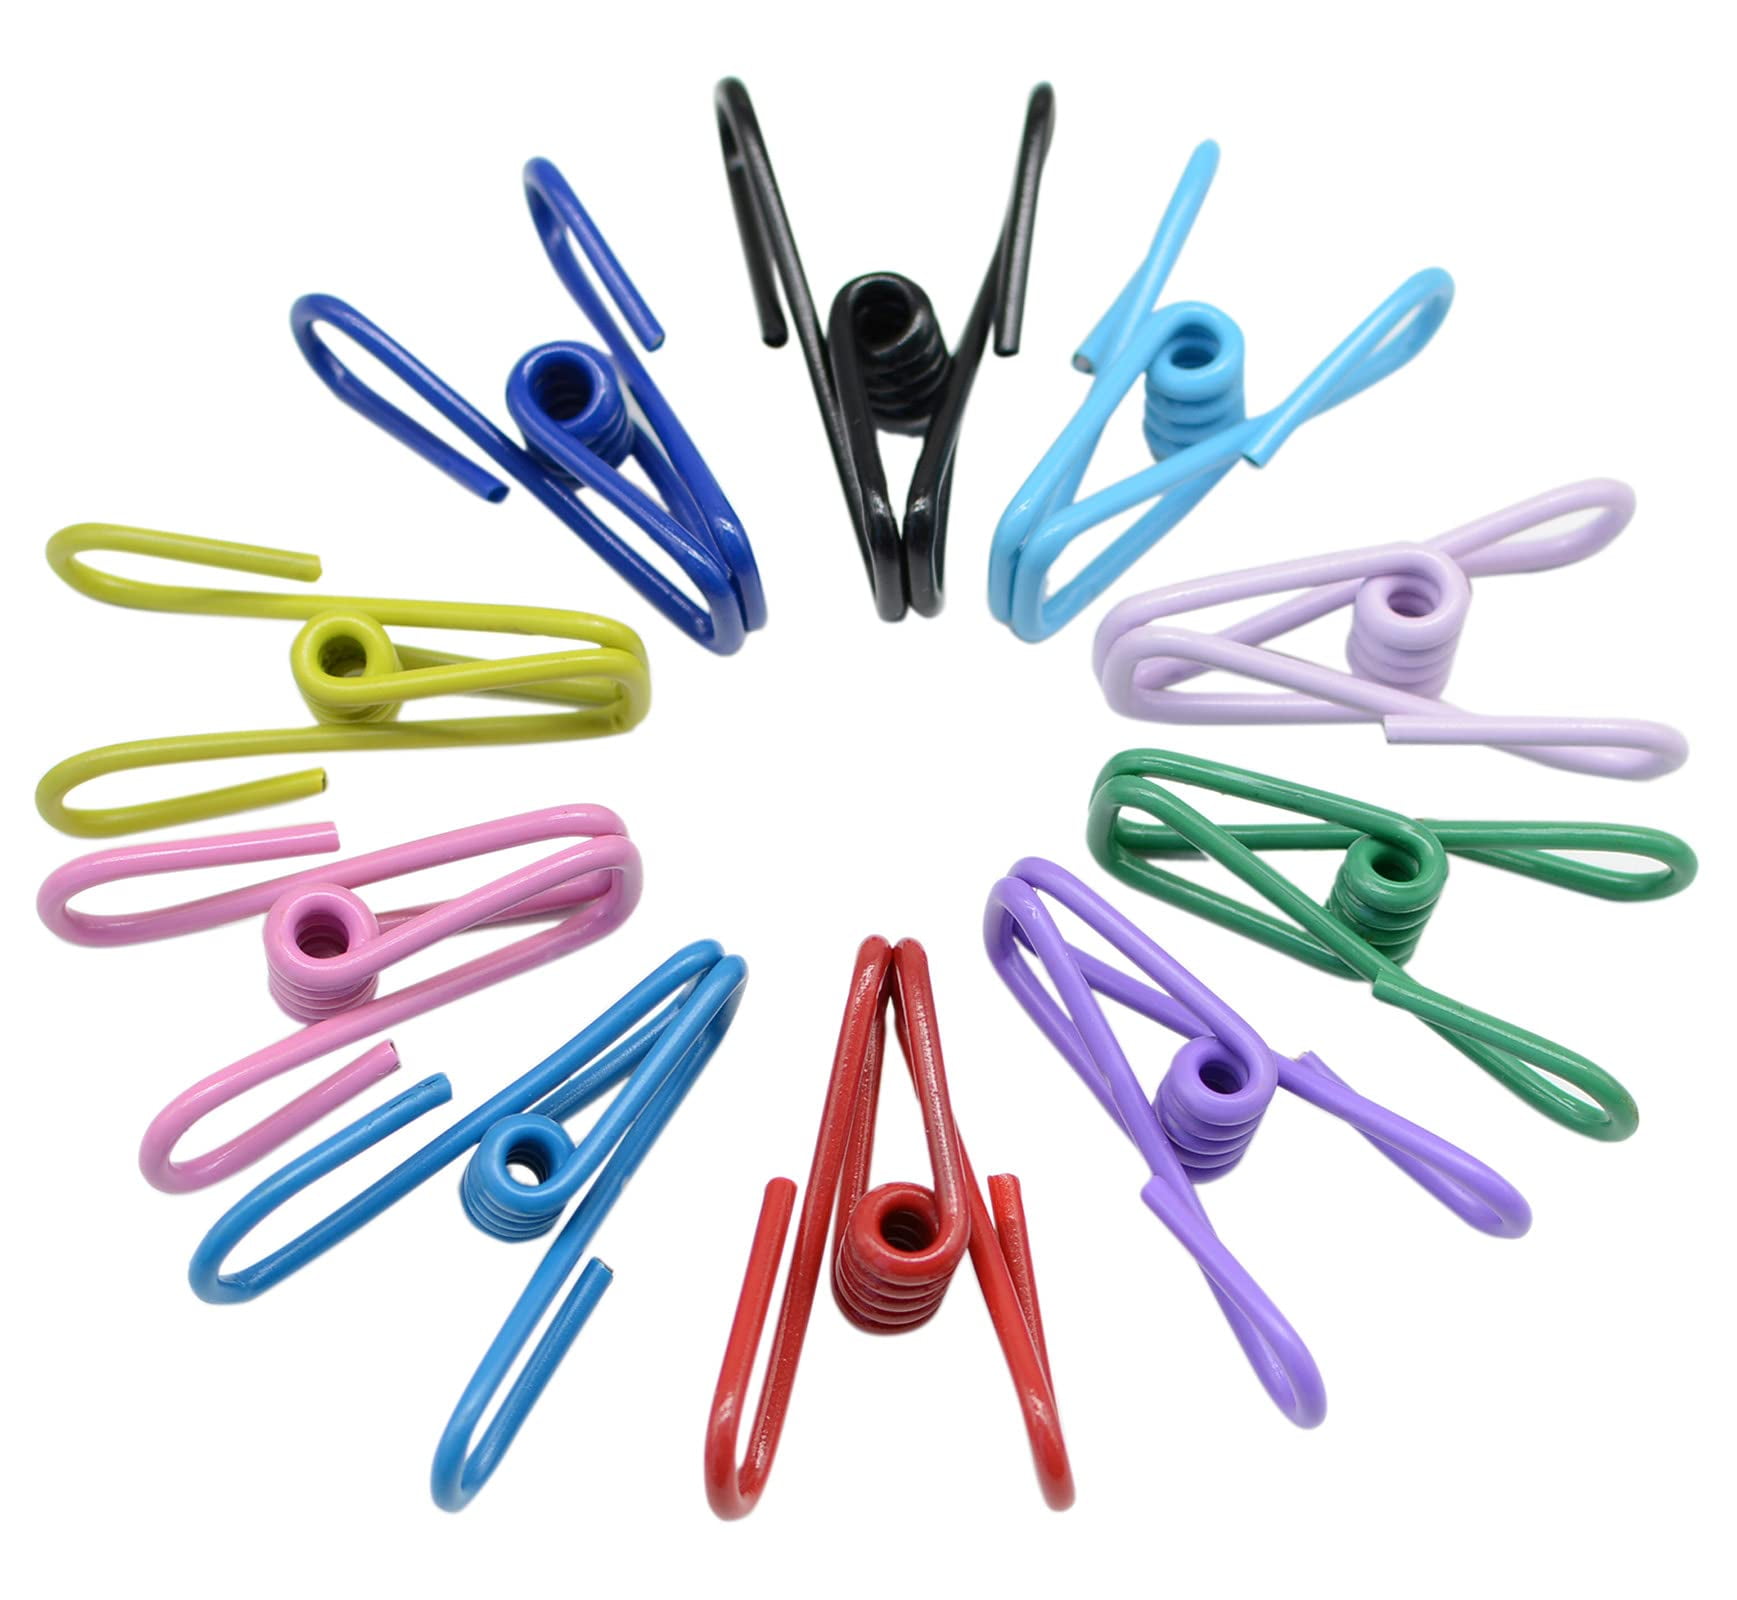 Quick Tip #5: Repurpose Clothes Hanger Clips Into Chip Clips